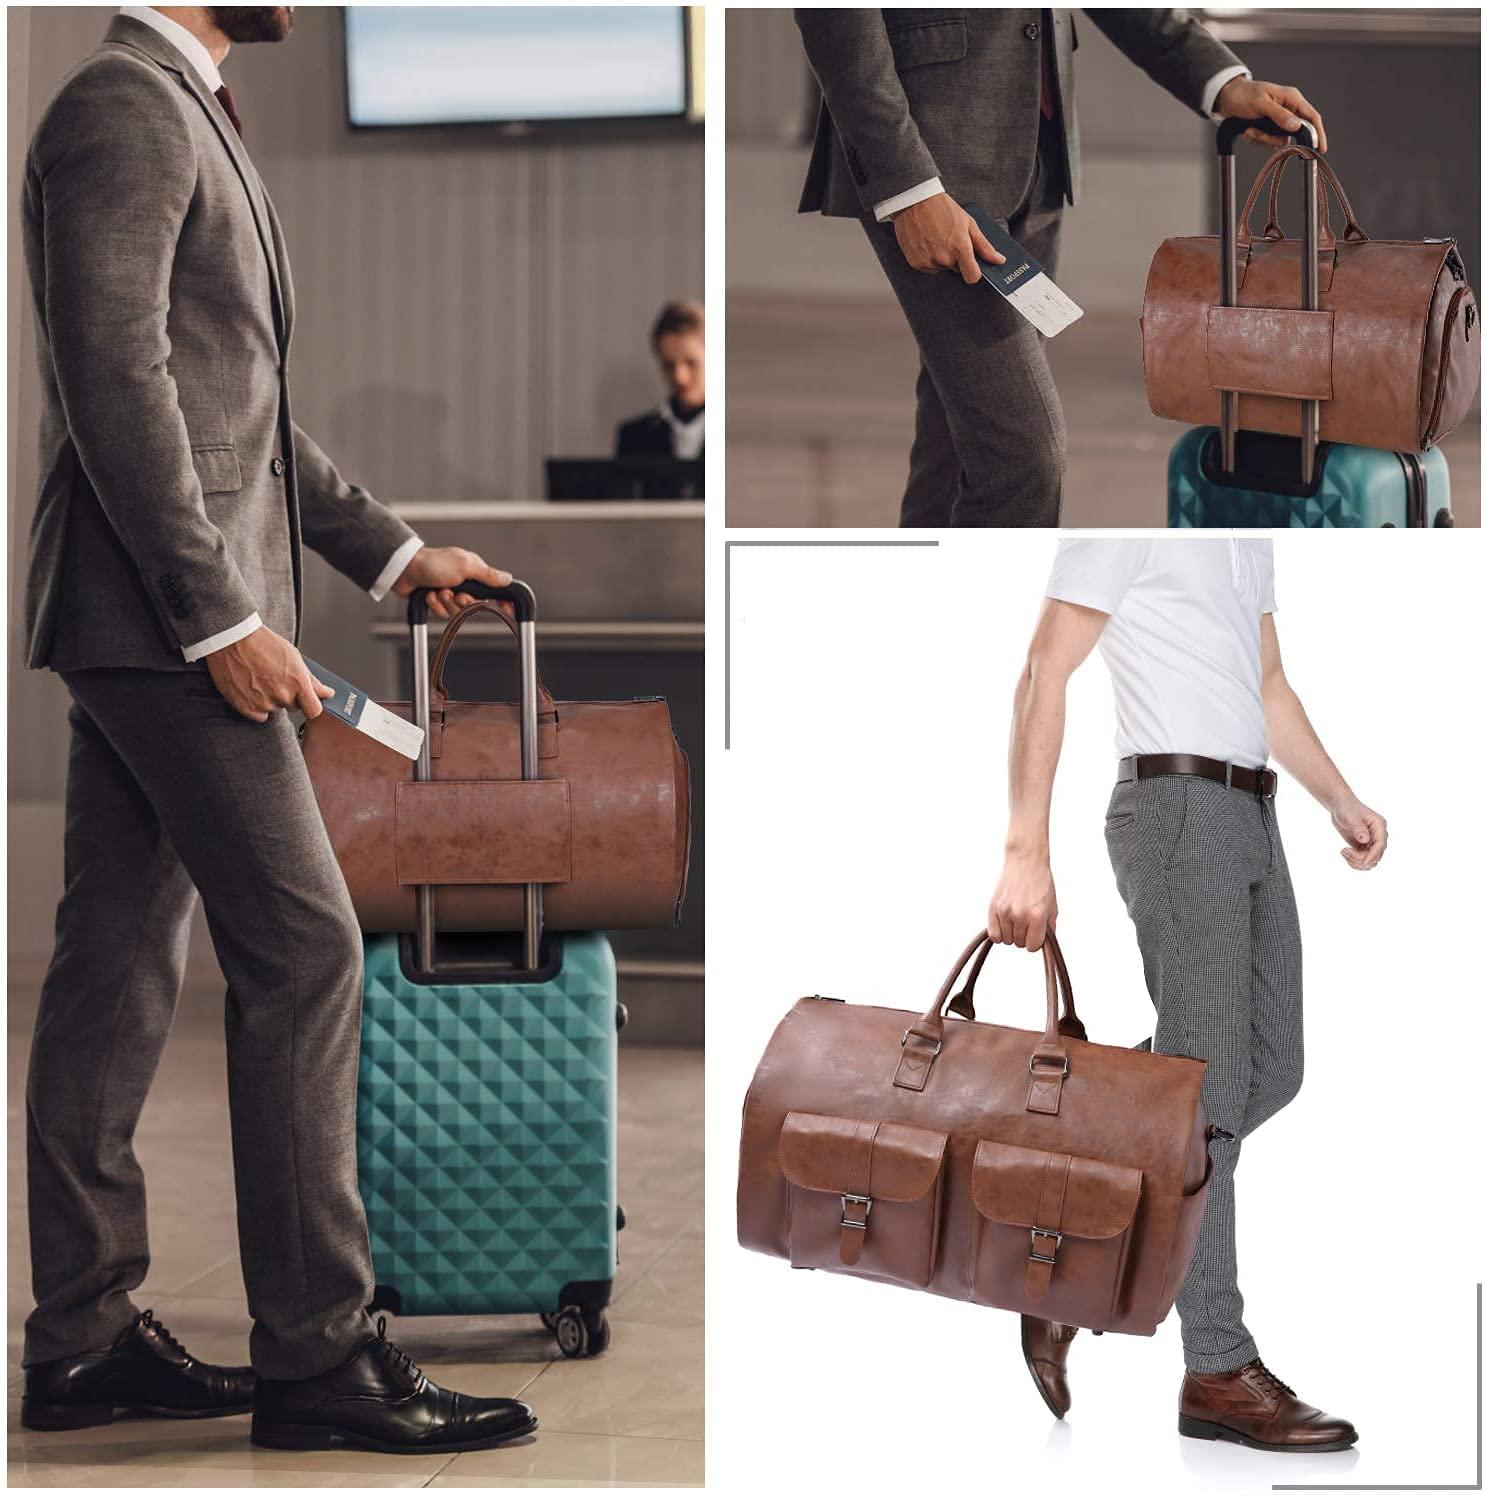 Pure Leather Duffel Bags - FR Fashion Co.